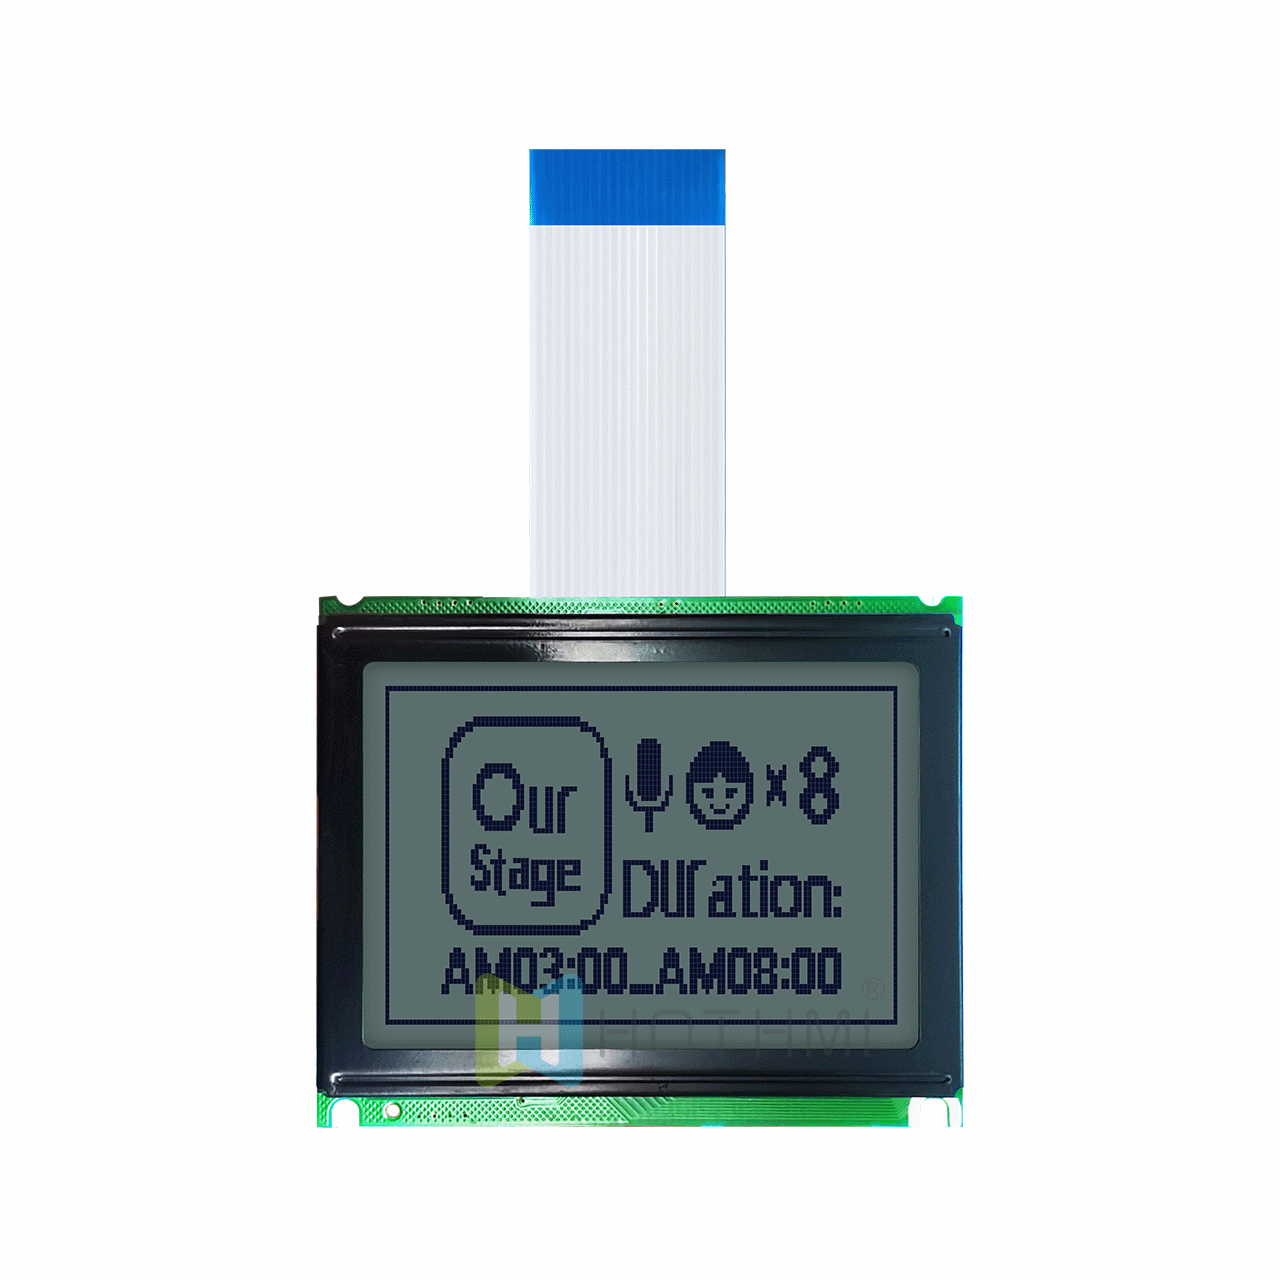 3-inch 128x64 graphic LCD display | 12864 graphic LCD module | STN positive display | yellow-green backlight